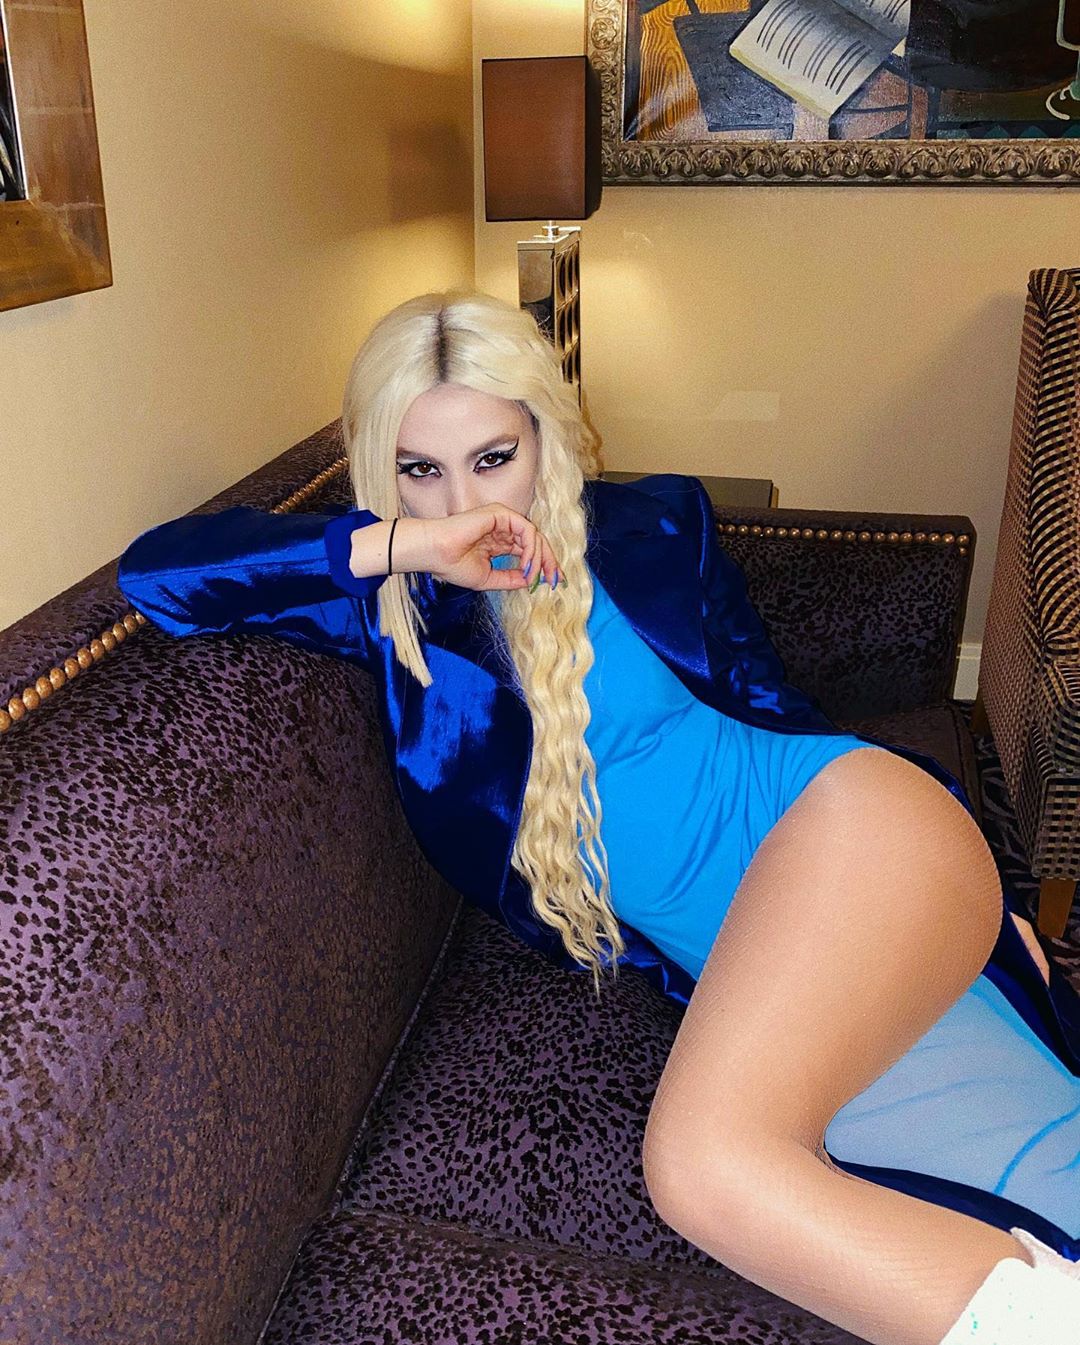 Check out busty Ava Max’s non-nude sexy photos from Instagram (2019-2020). 